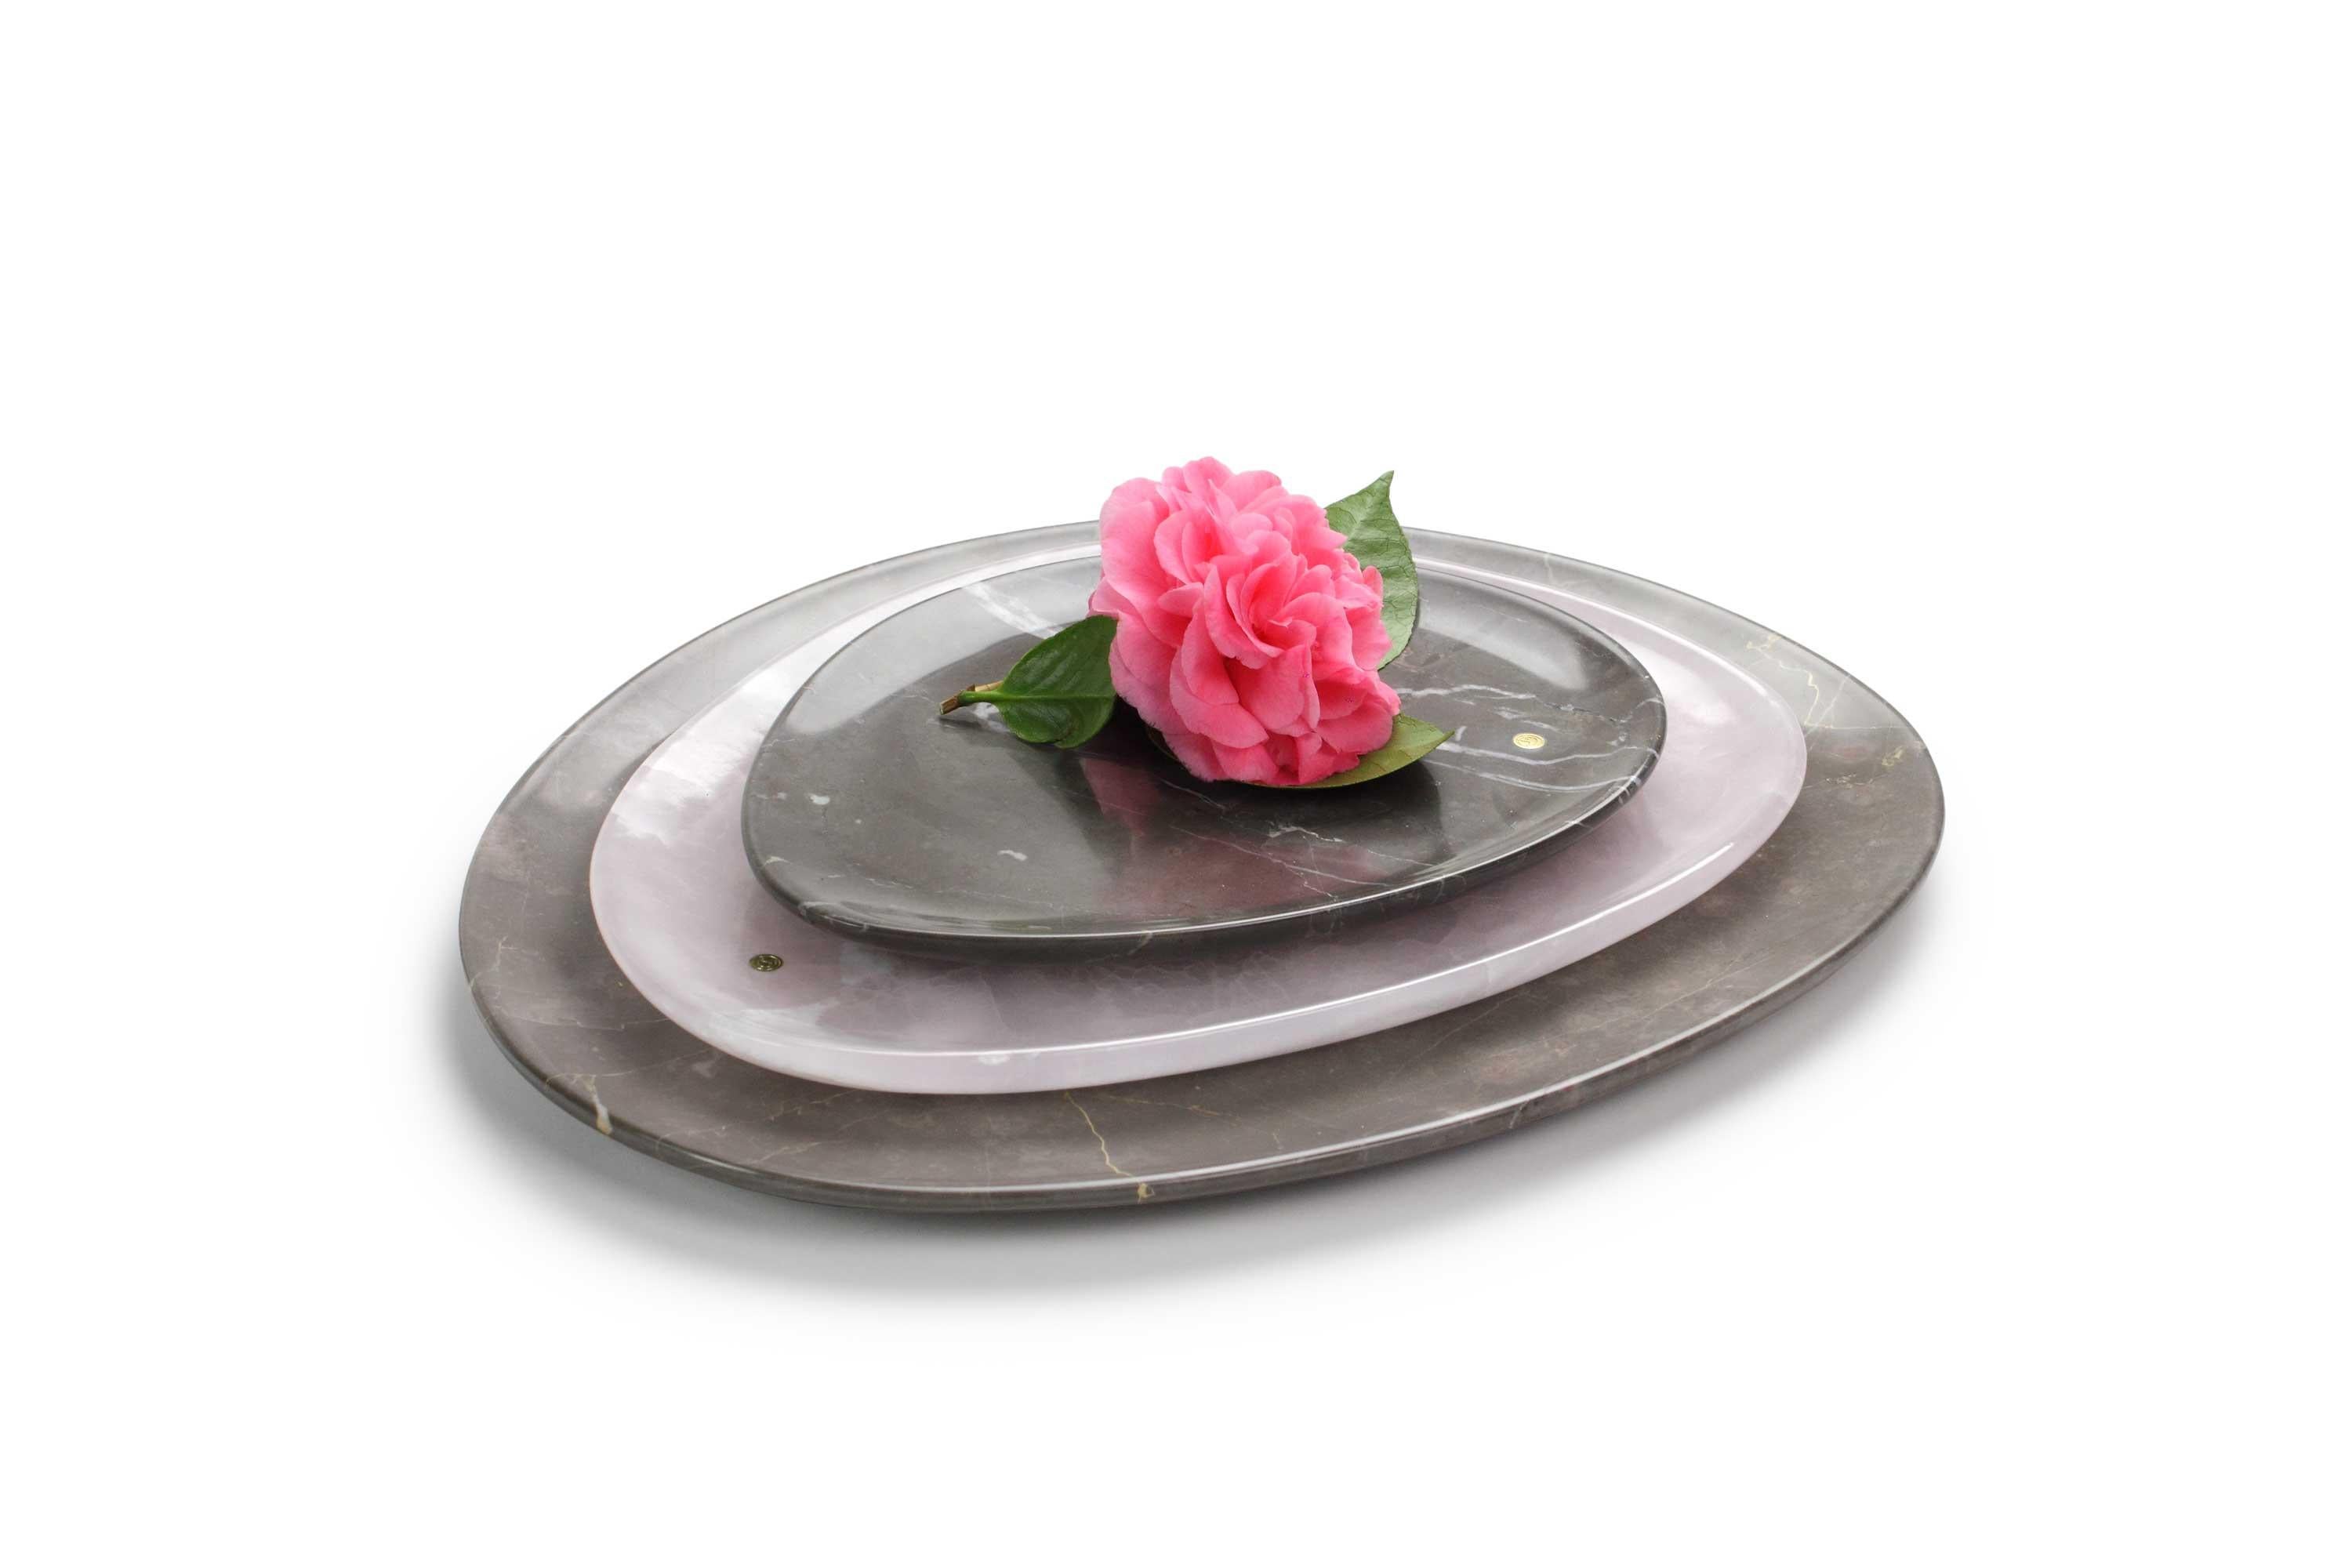 Hand carved presentation plates in Imperial grey marble and pink onyx. 
Multiple use as plates, platters and placers.

Dimensions: Small - L 24 x W 20 x H 1.8 cm, Medium - L 30 x W 28 x H 1.8 cm, Big - L 36 x W 35 H 1.8 cm.
Available in different